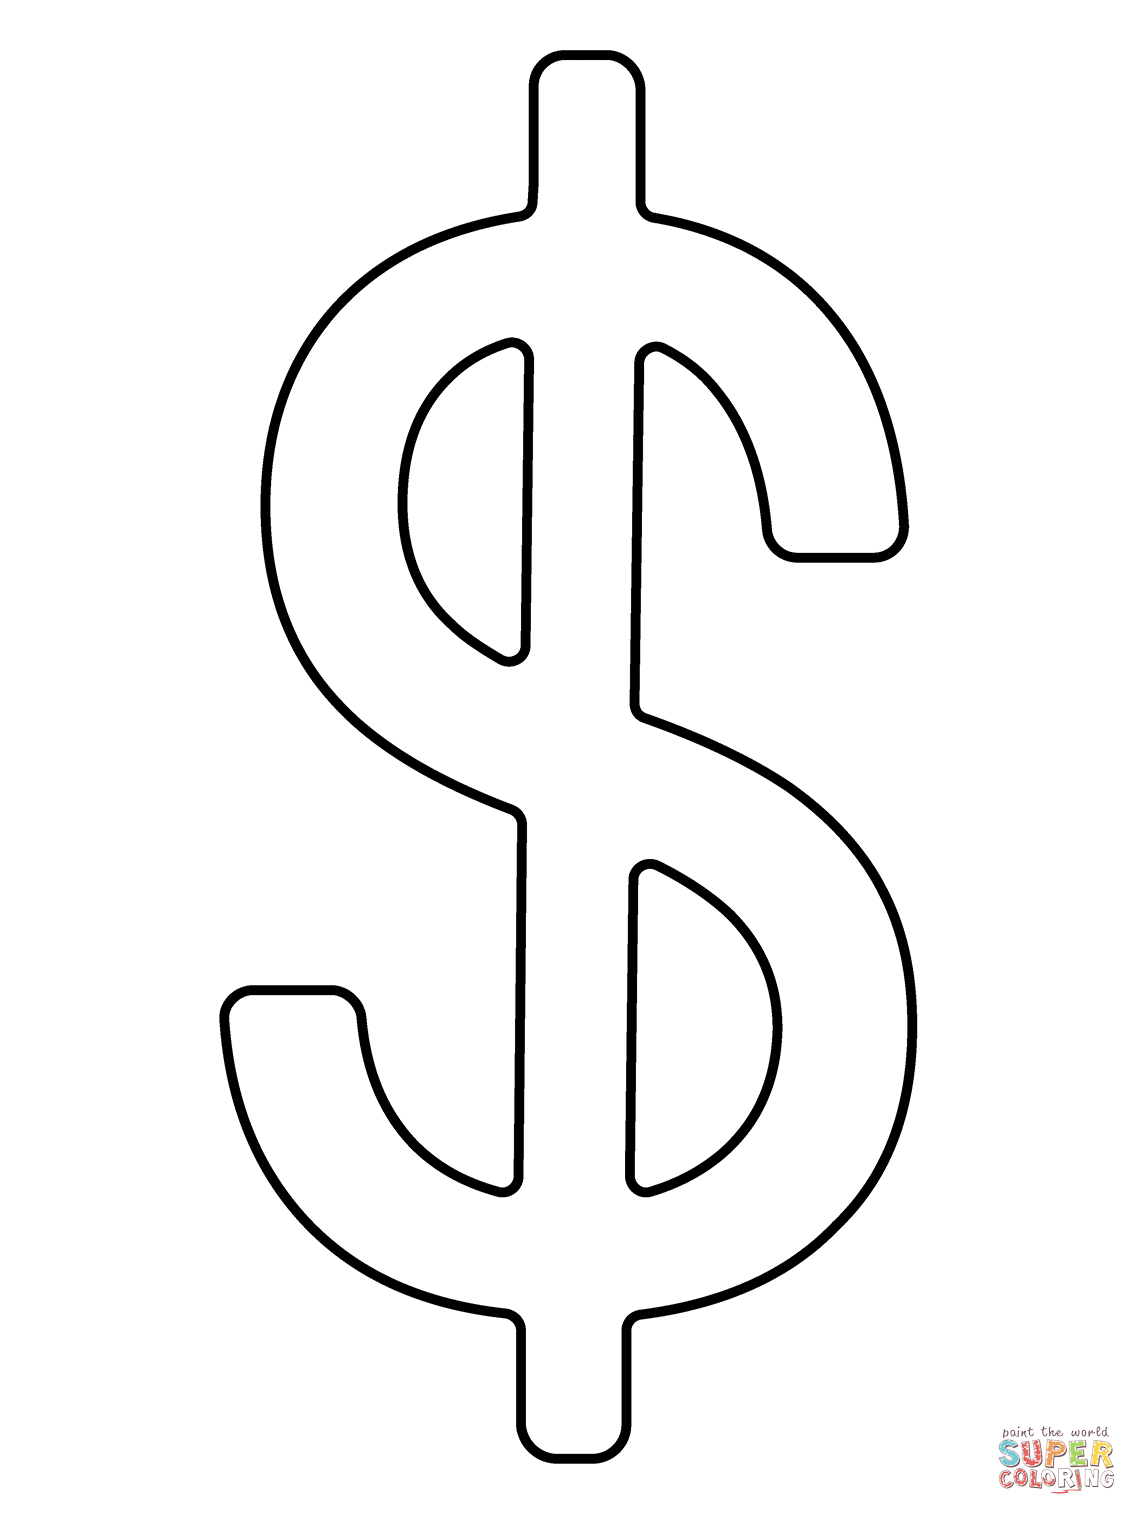 Heavy dollar sign emoji coloring page free printable coloring pages